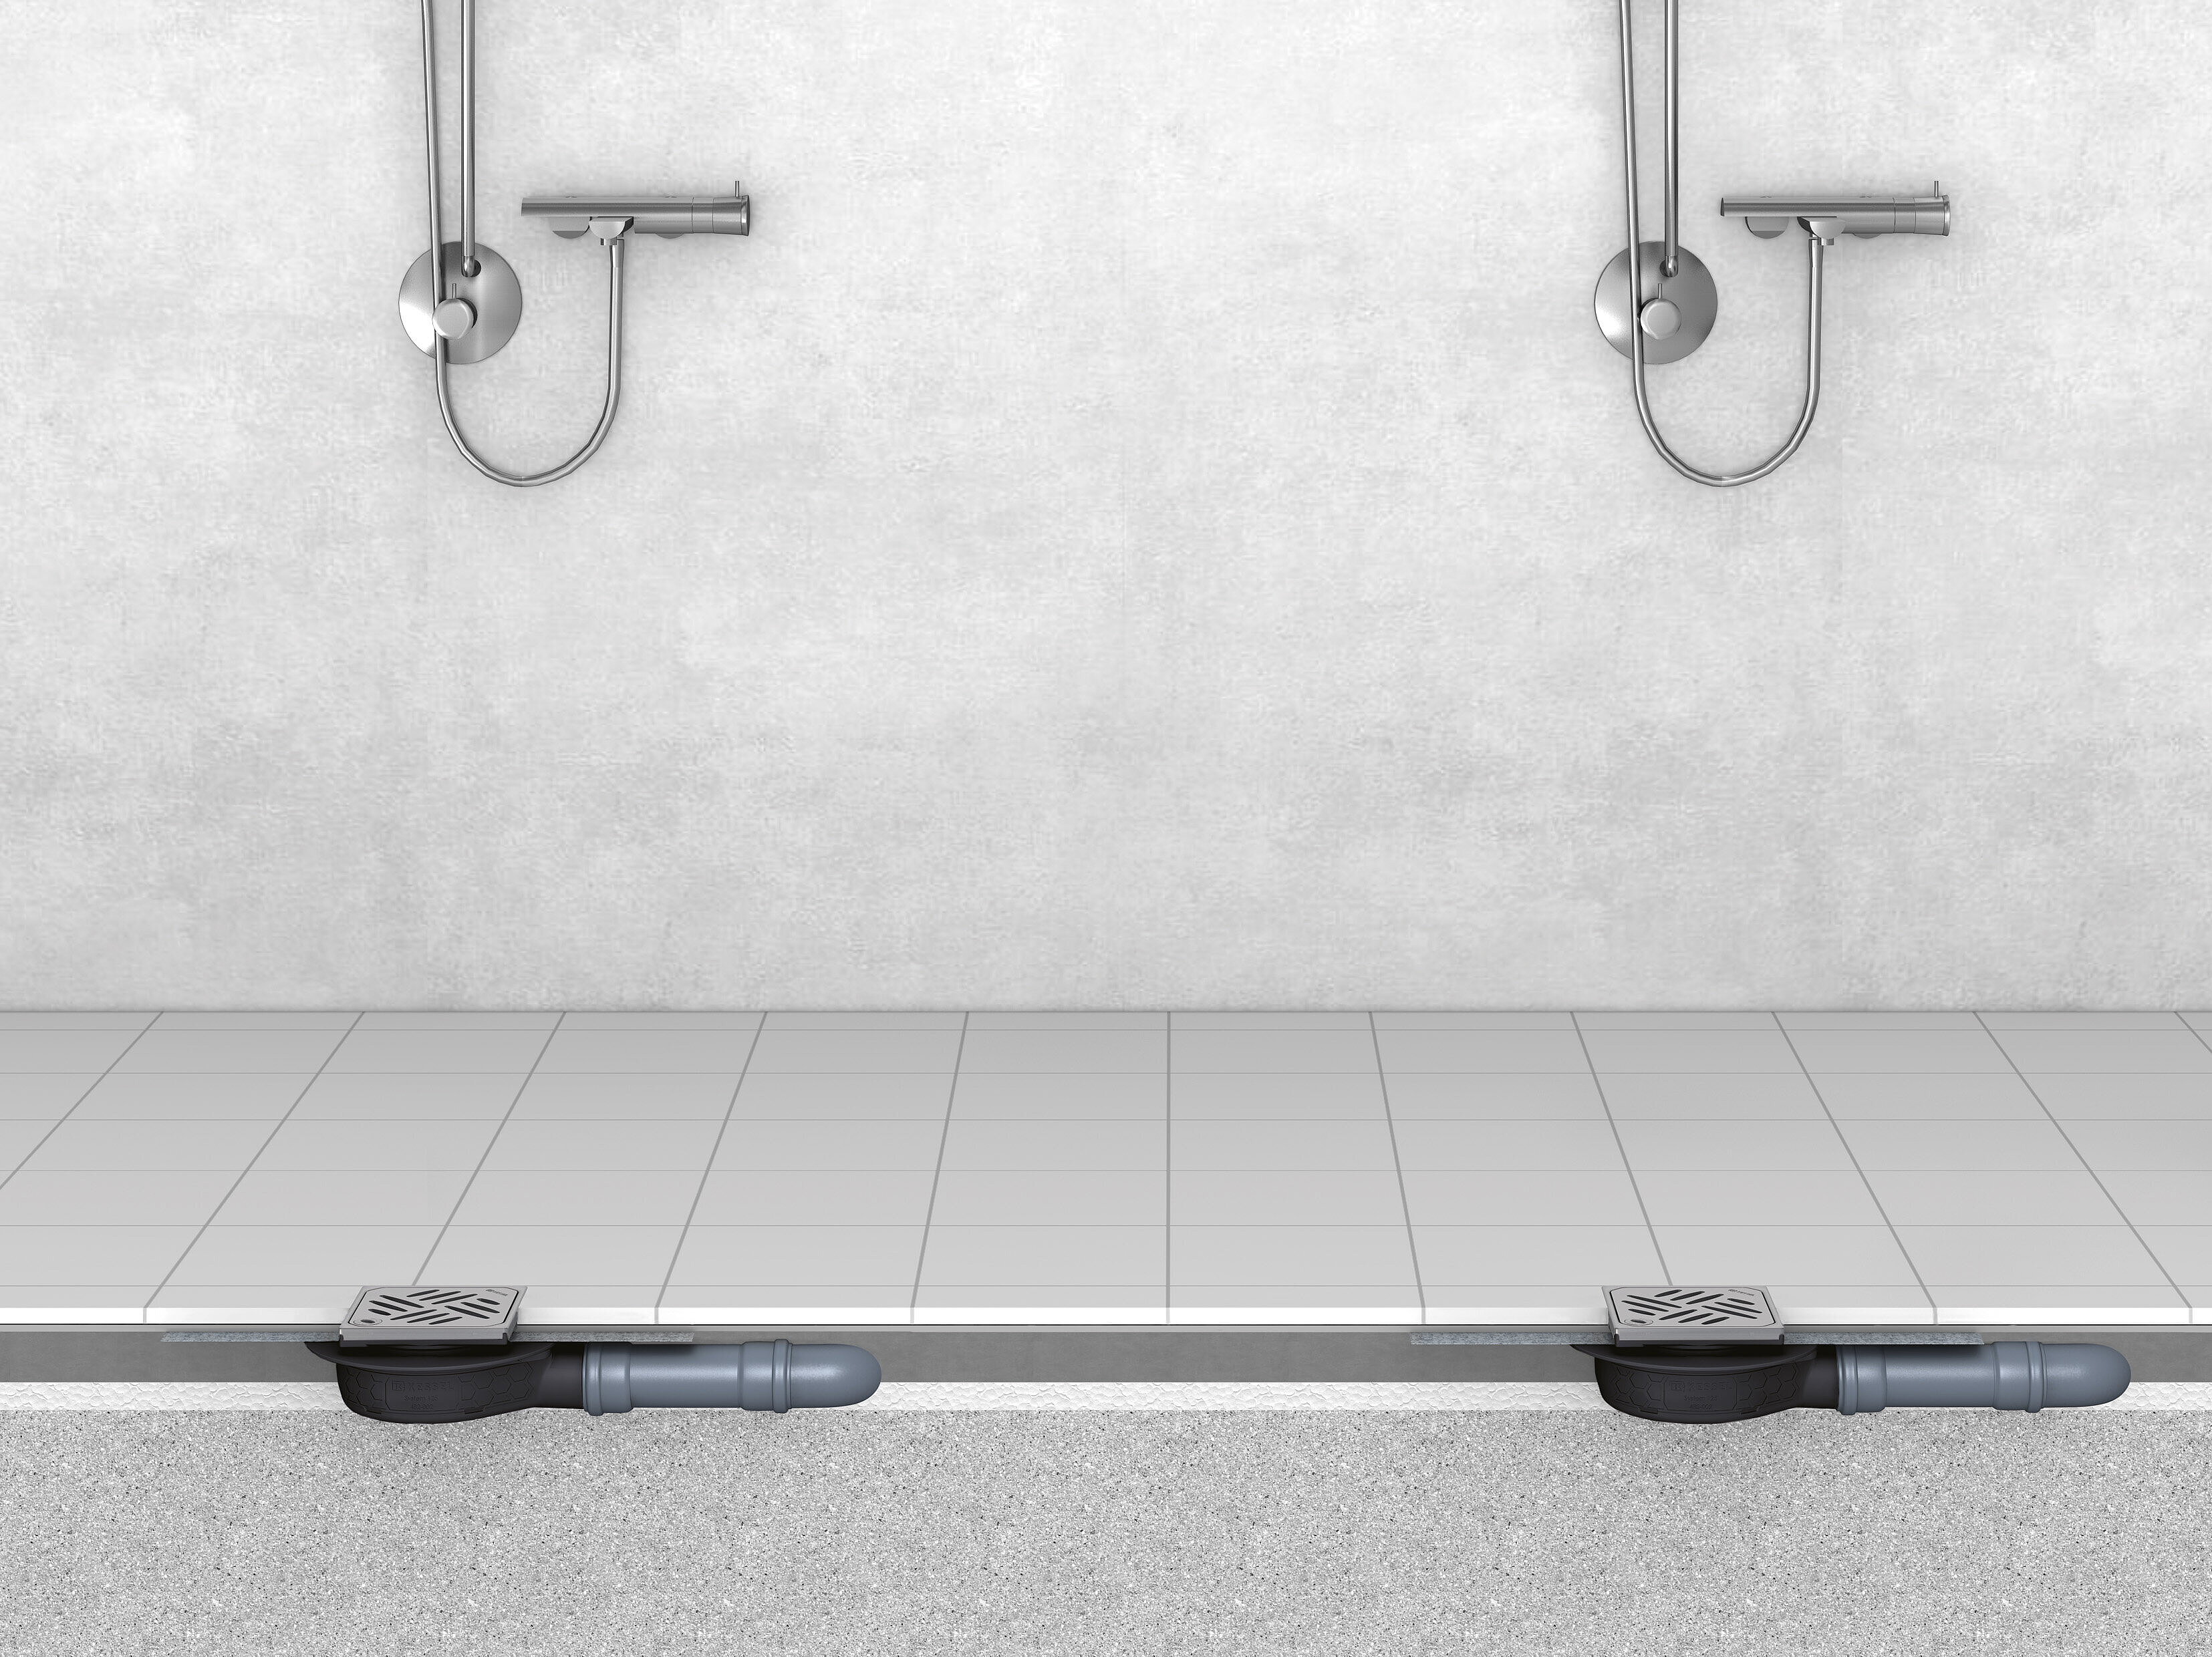 Installation diagram for the Ultraflat bathroom drain with a Kessel design cover and Lock & Lift locking system